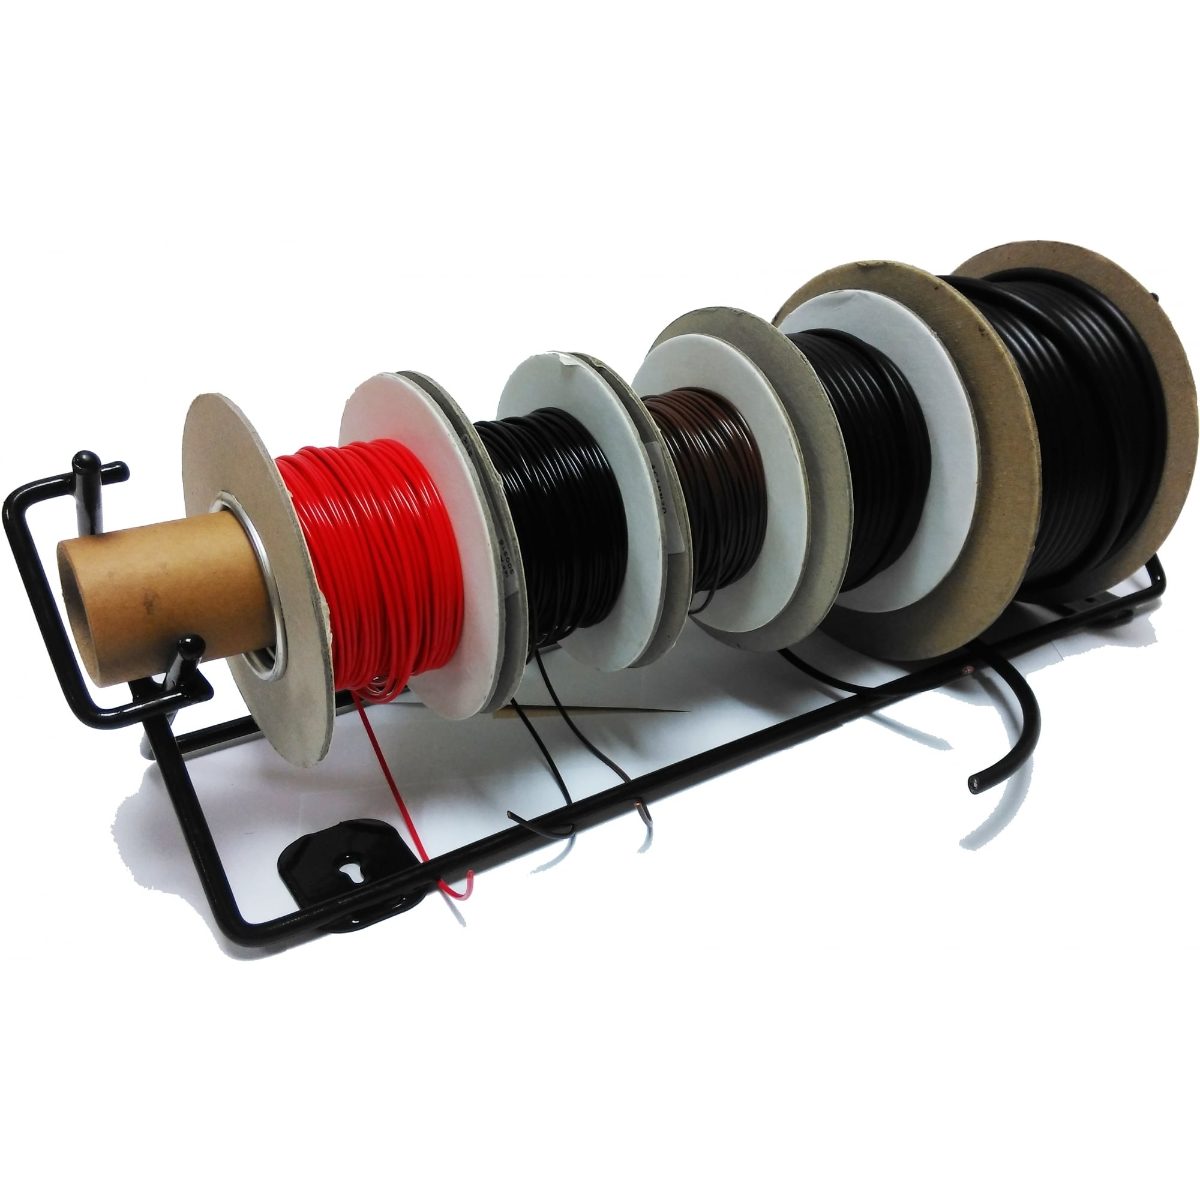 Cable Reel Holder & 5 Cable Reels - Wall Mountable Display (CABLEKIT) -  Search Workshop Supplies Ltd